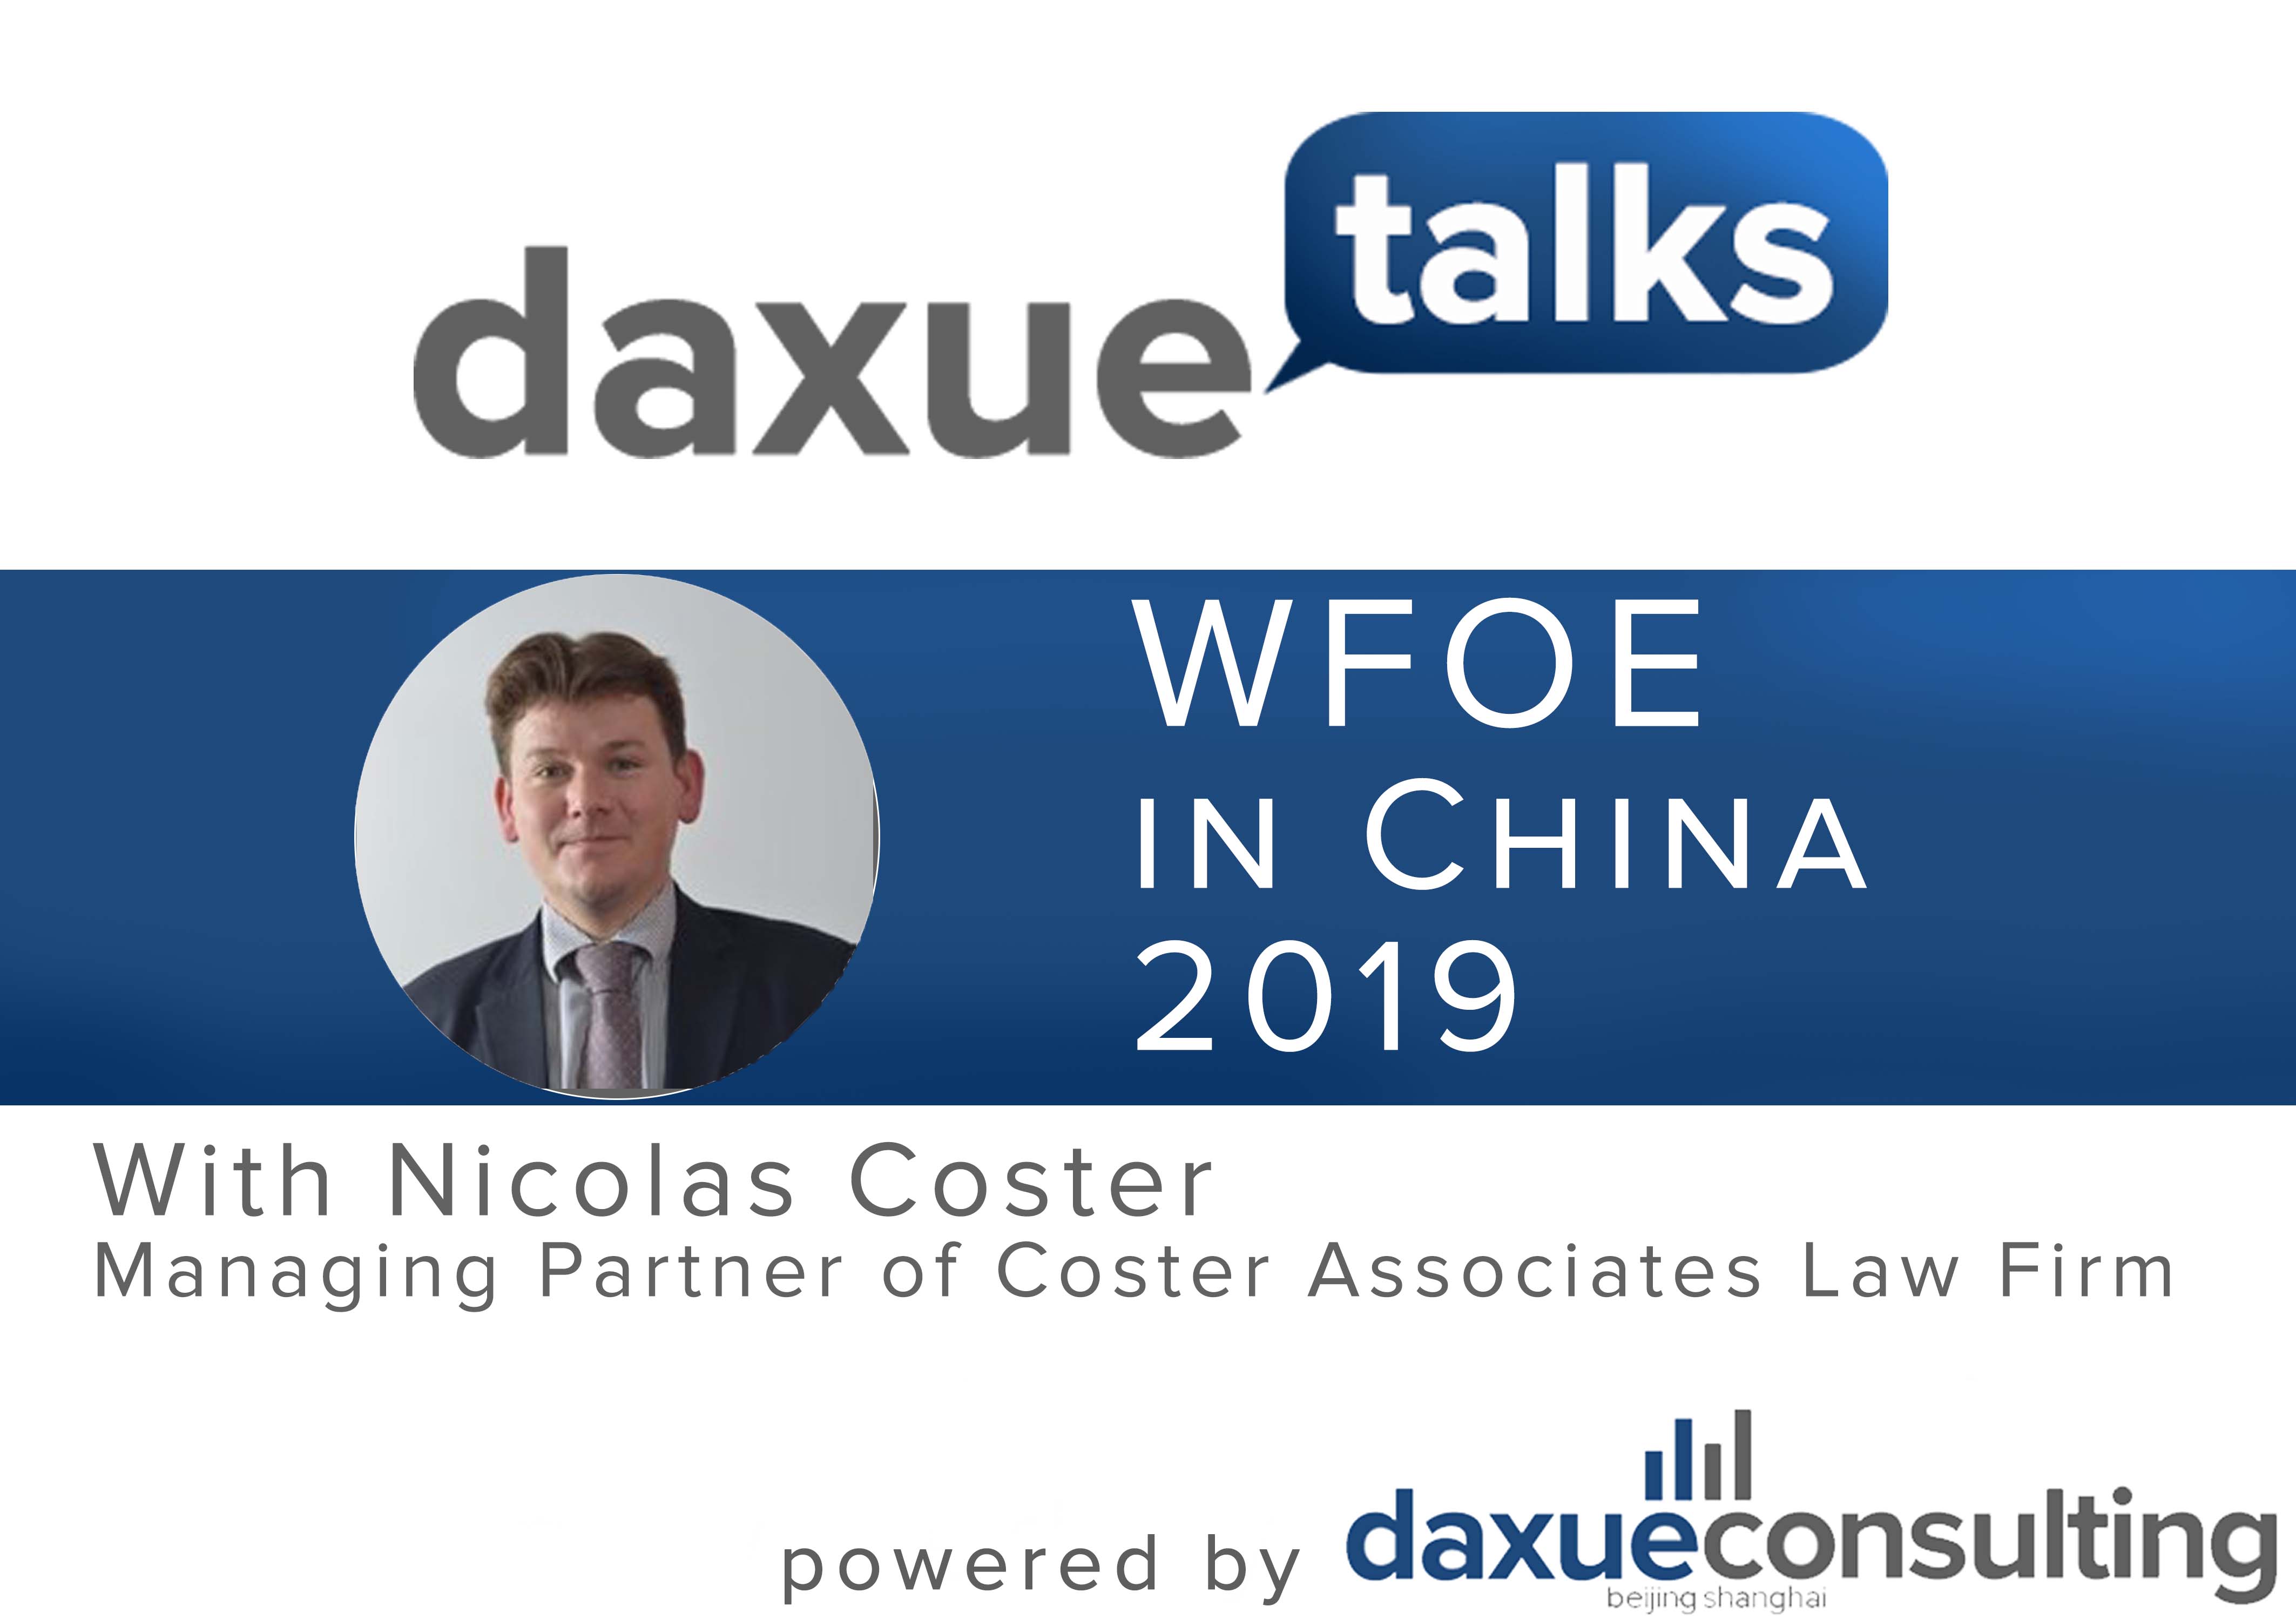 Daxue Talks 2: Everything you need to know about WFOE in China in 2019